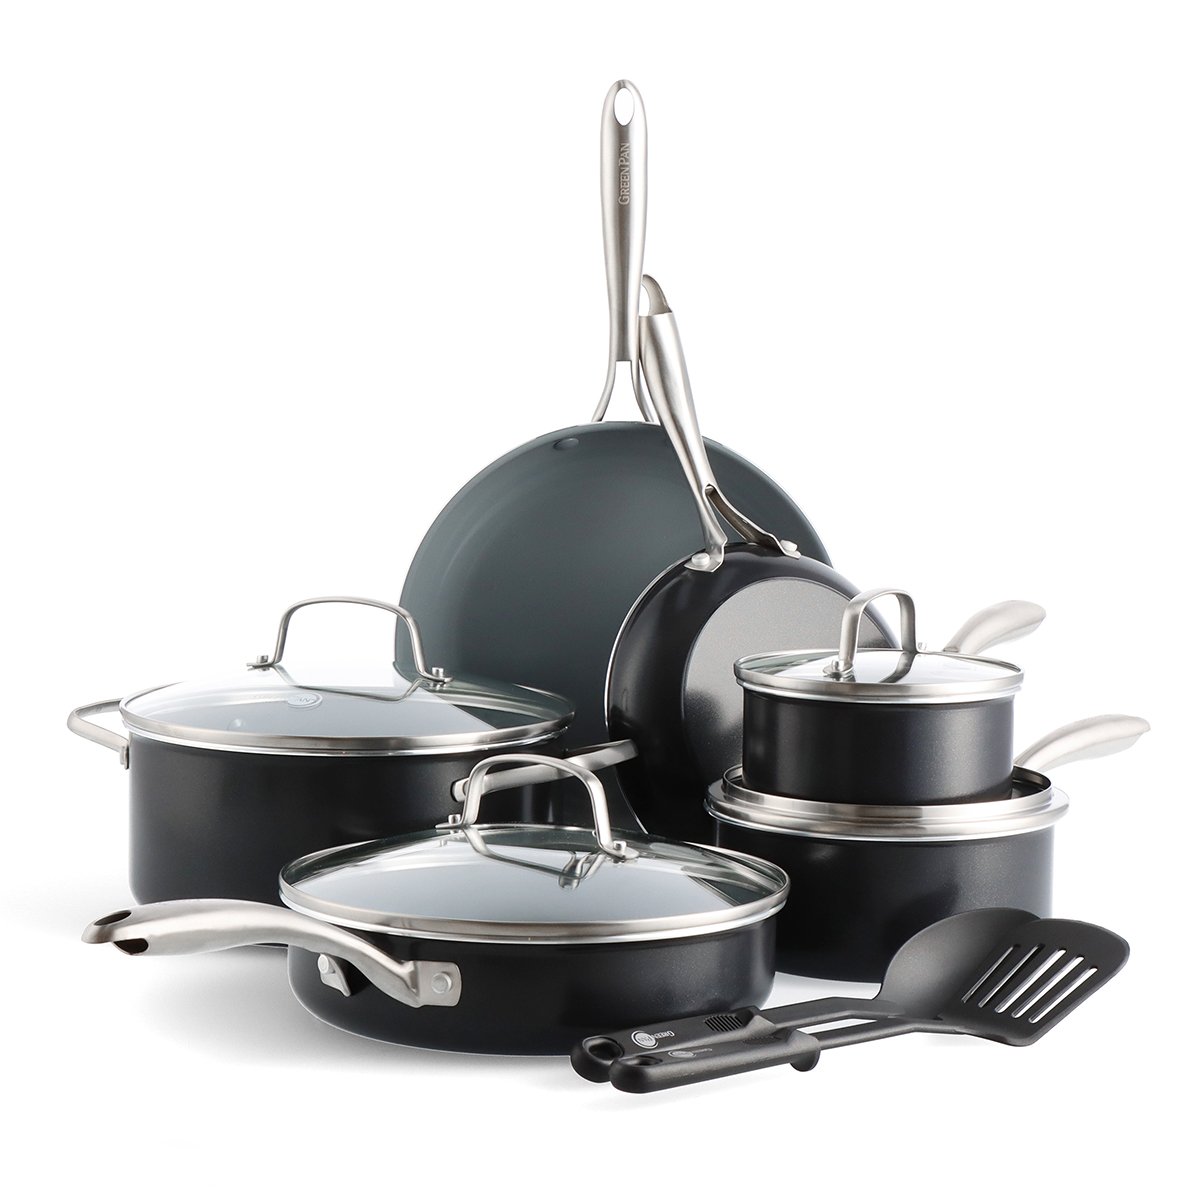 Simply Calphalon Nonstick Set with Glass Covers - Shop Cookware Sets at  H-E-B